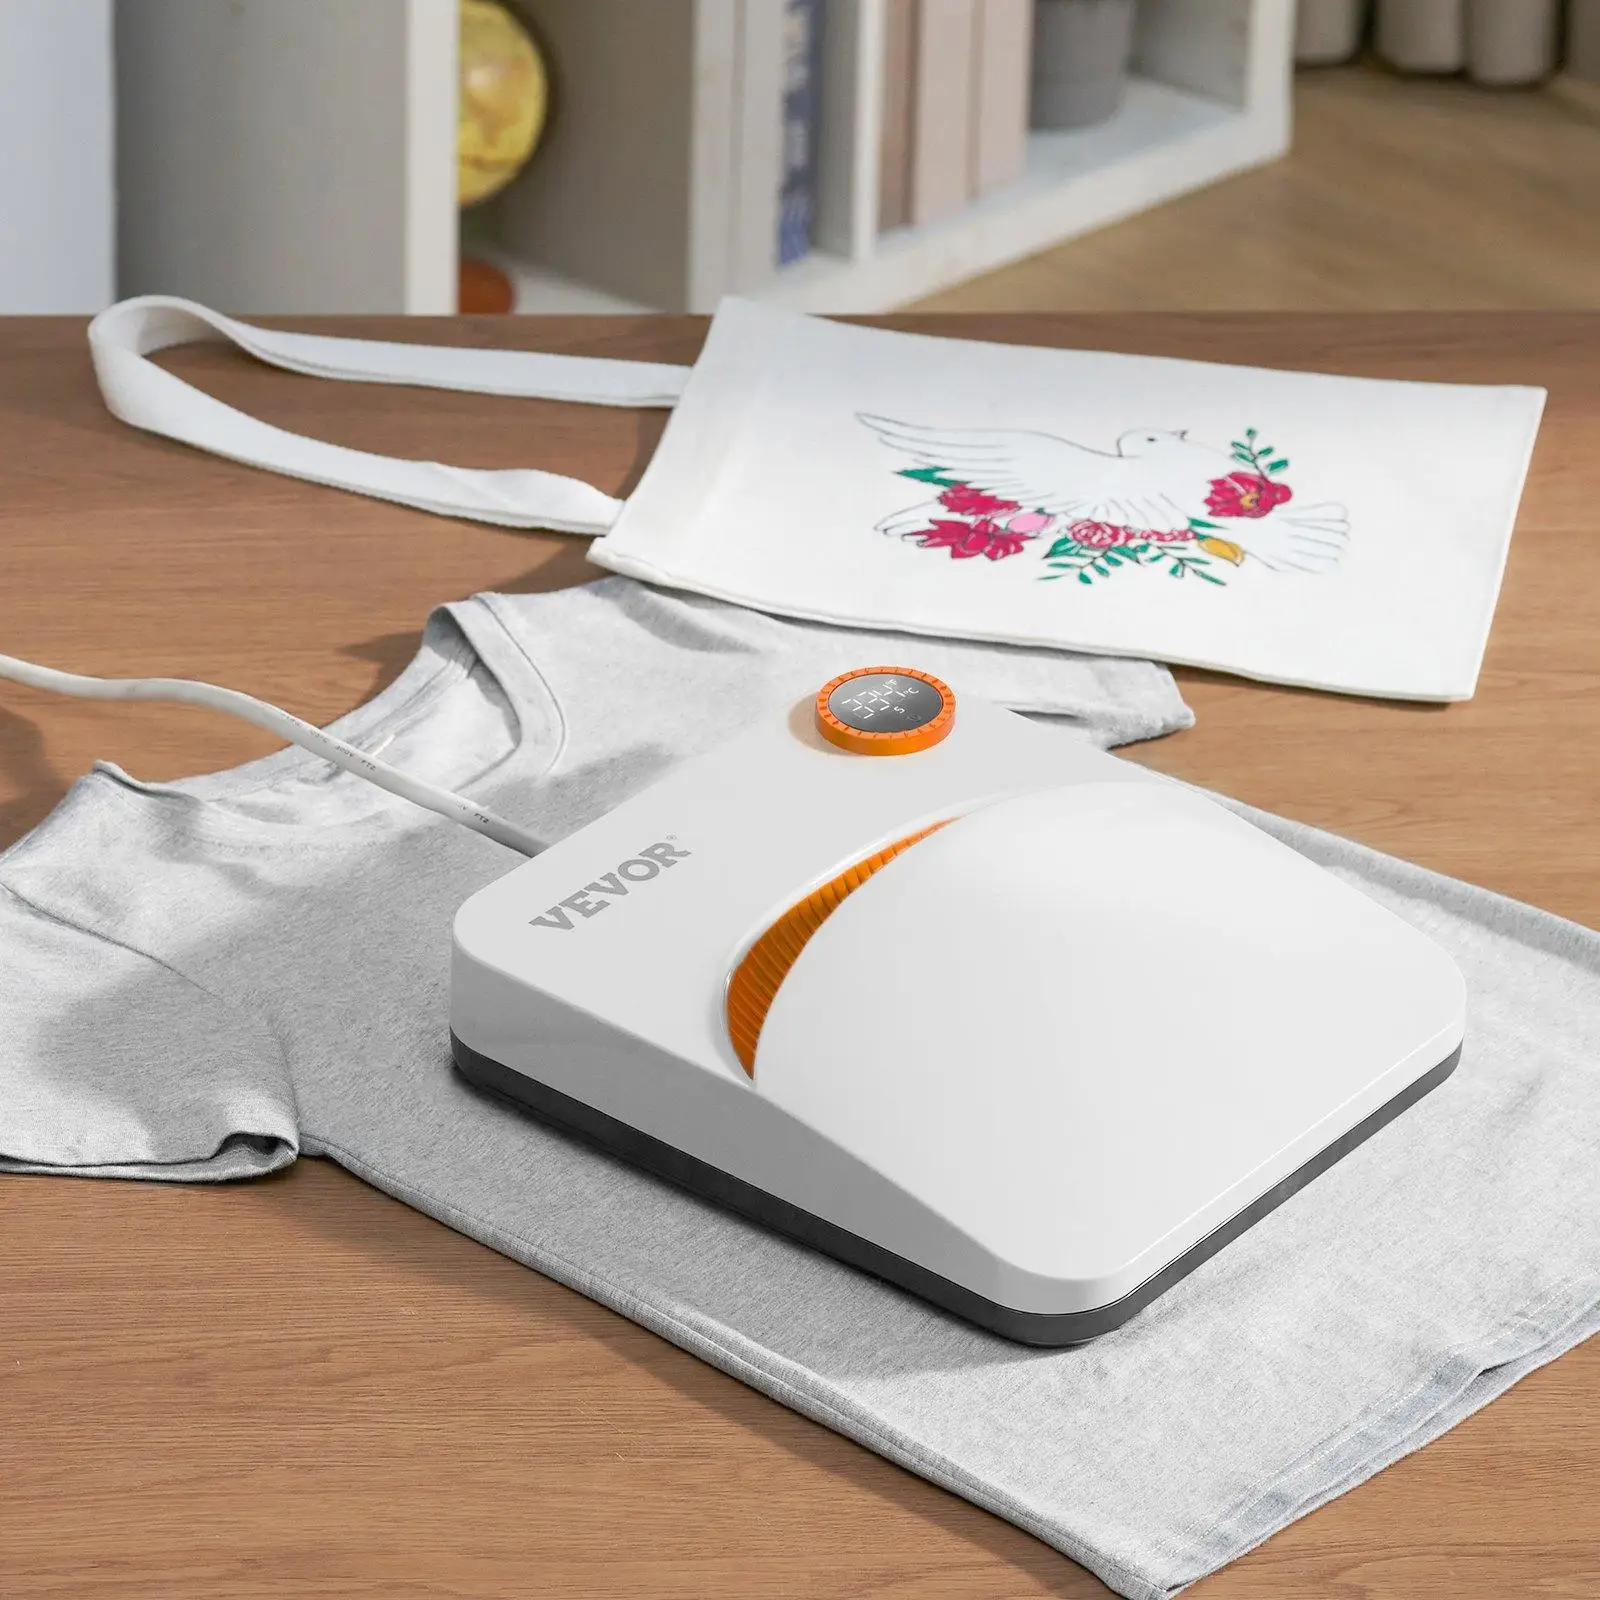 Sublimation Heat Press Buyers Guide of 2023